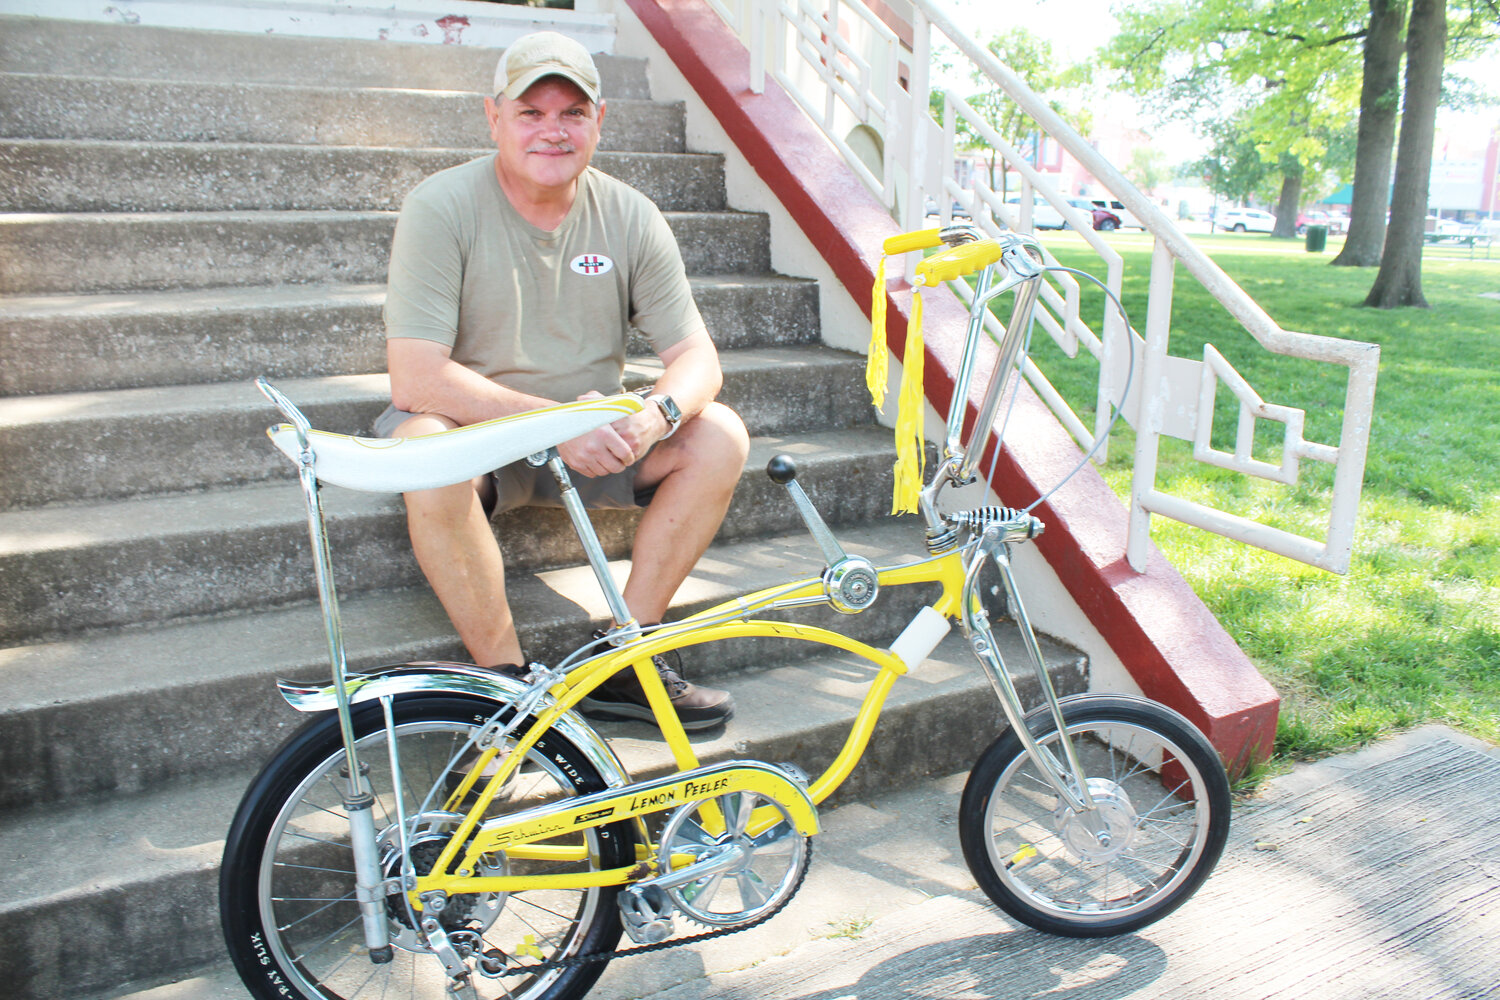 A BRAND NEW EDITION to Cruise Night will come to Clinton on June 10,when Skipper Buckley shares his collection of Schwinn Sting-Rays during Bike Fest.